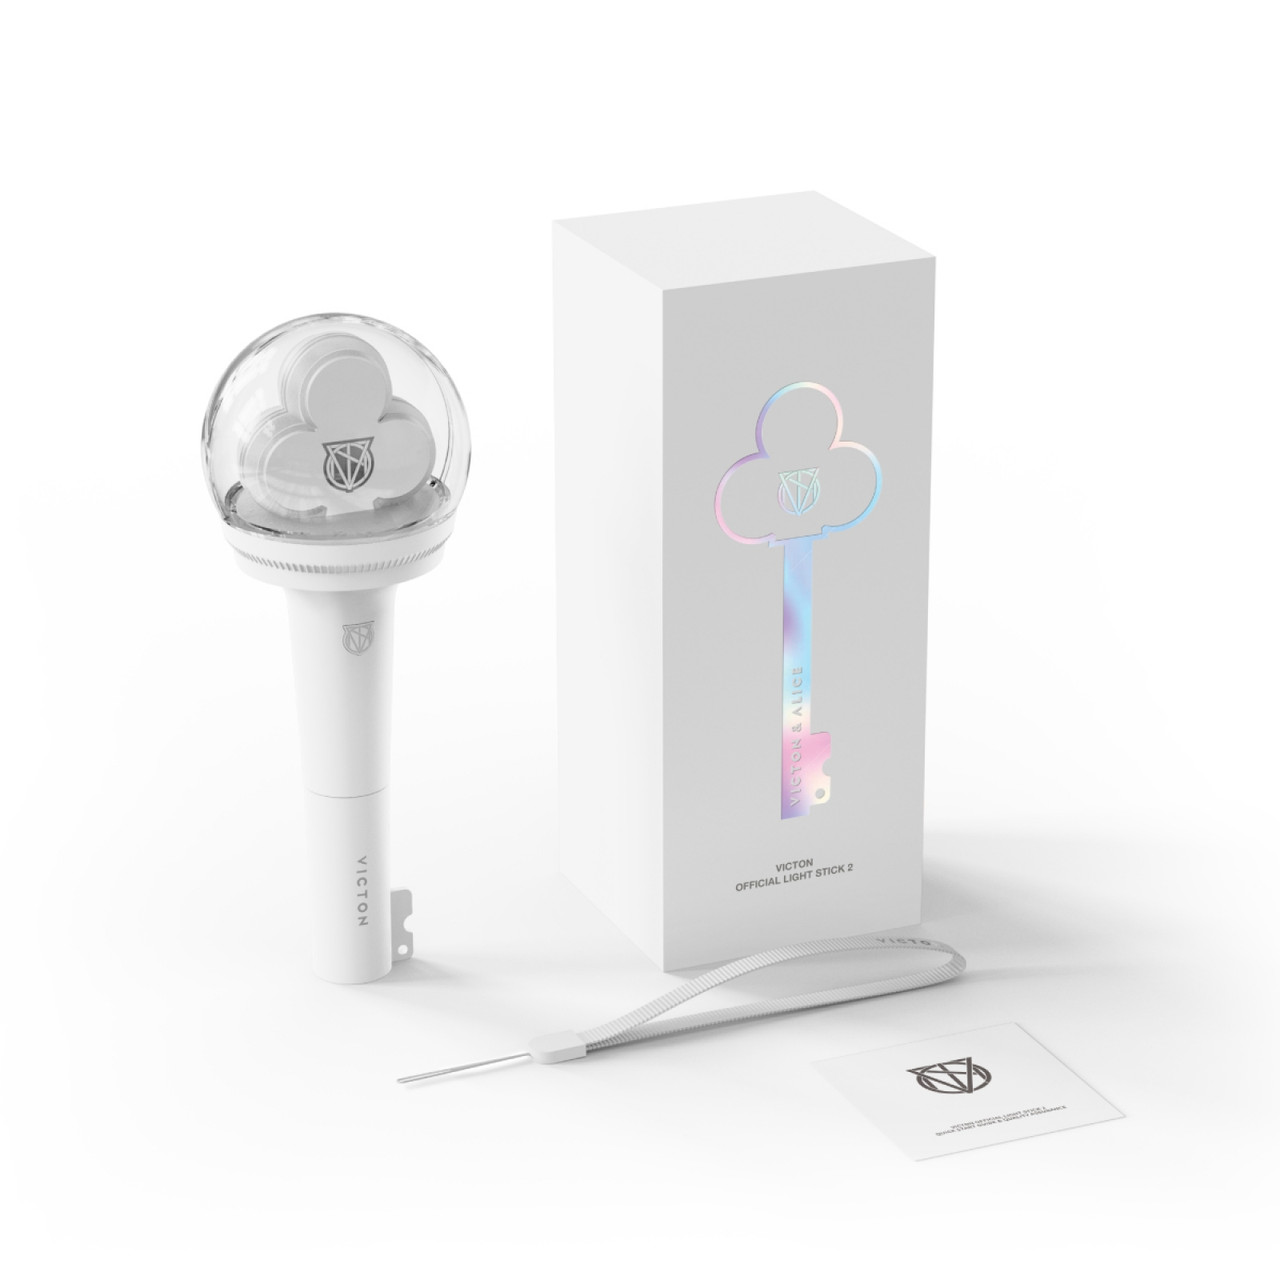 STRAY KIDS OFFICIAL LIGHT STICK VER 2 – Welcome Kpop